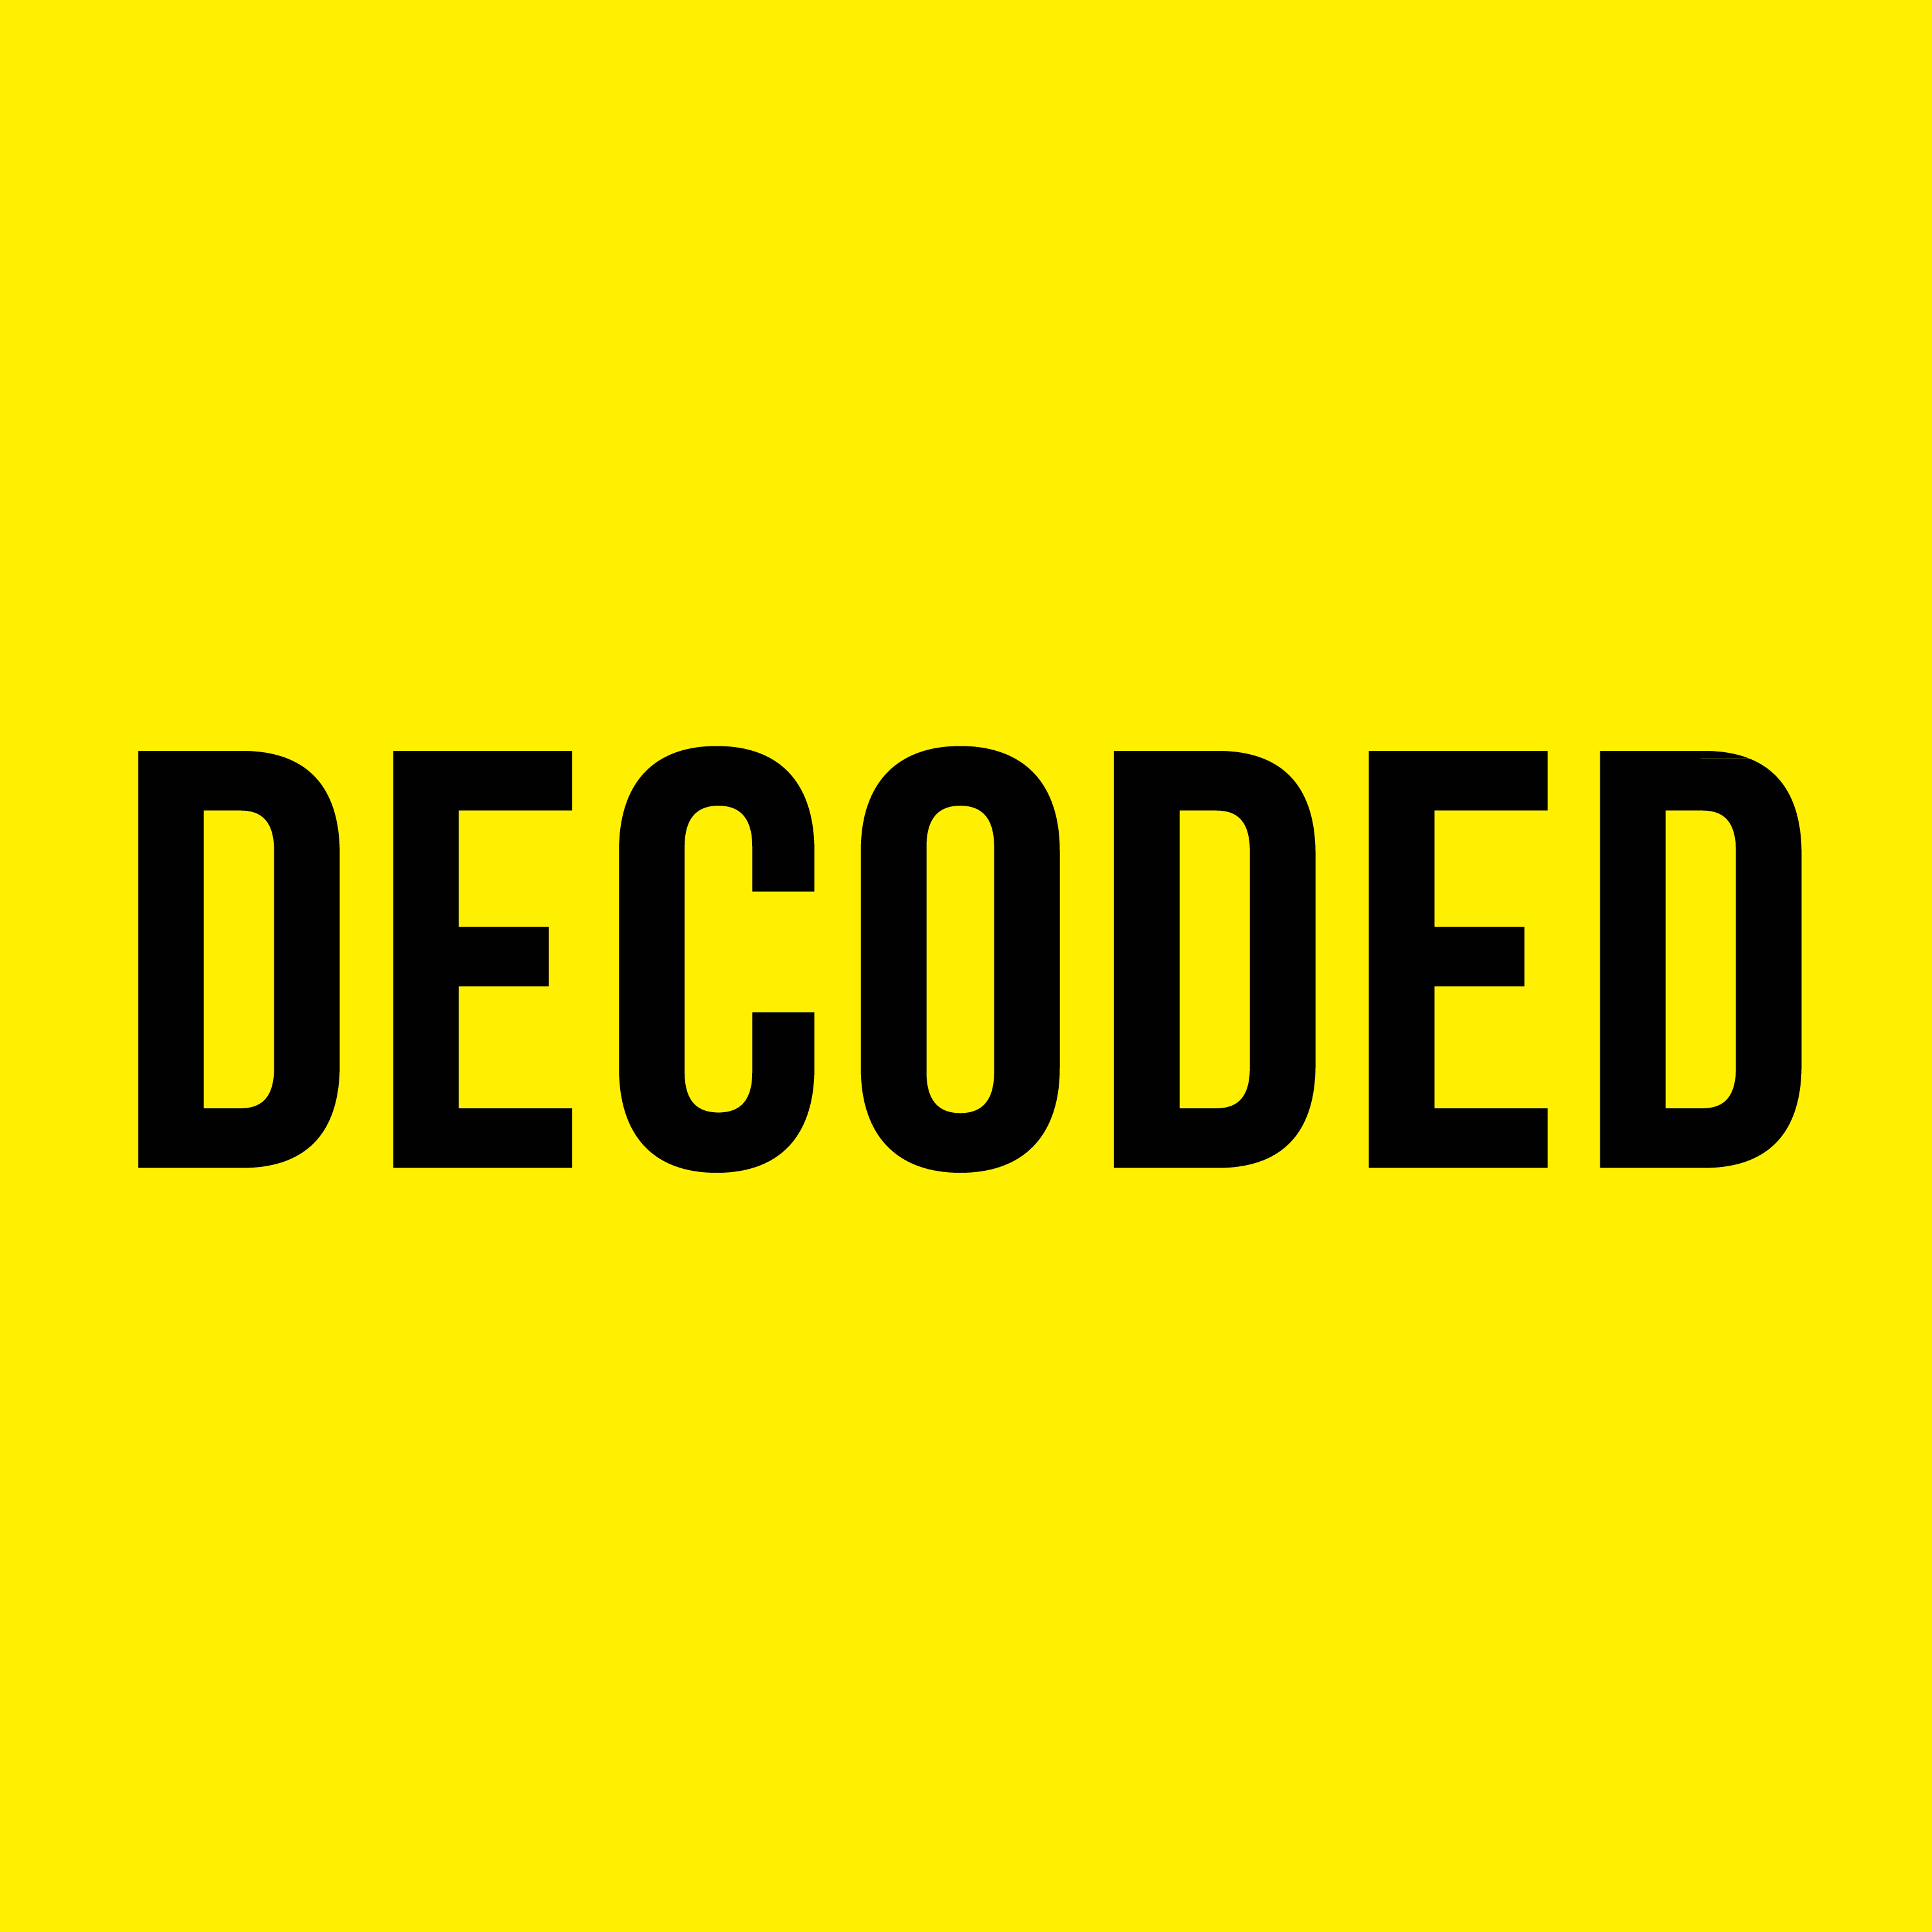 The Decoded logo